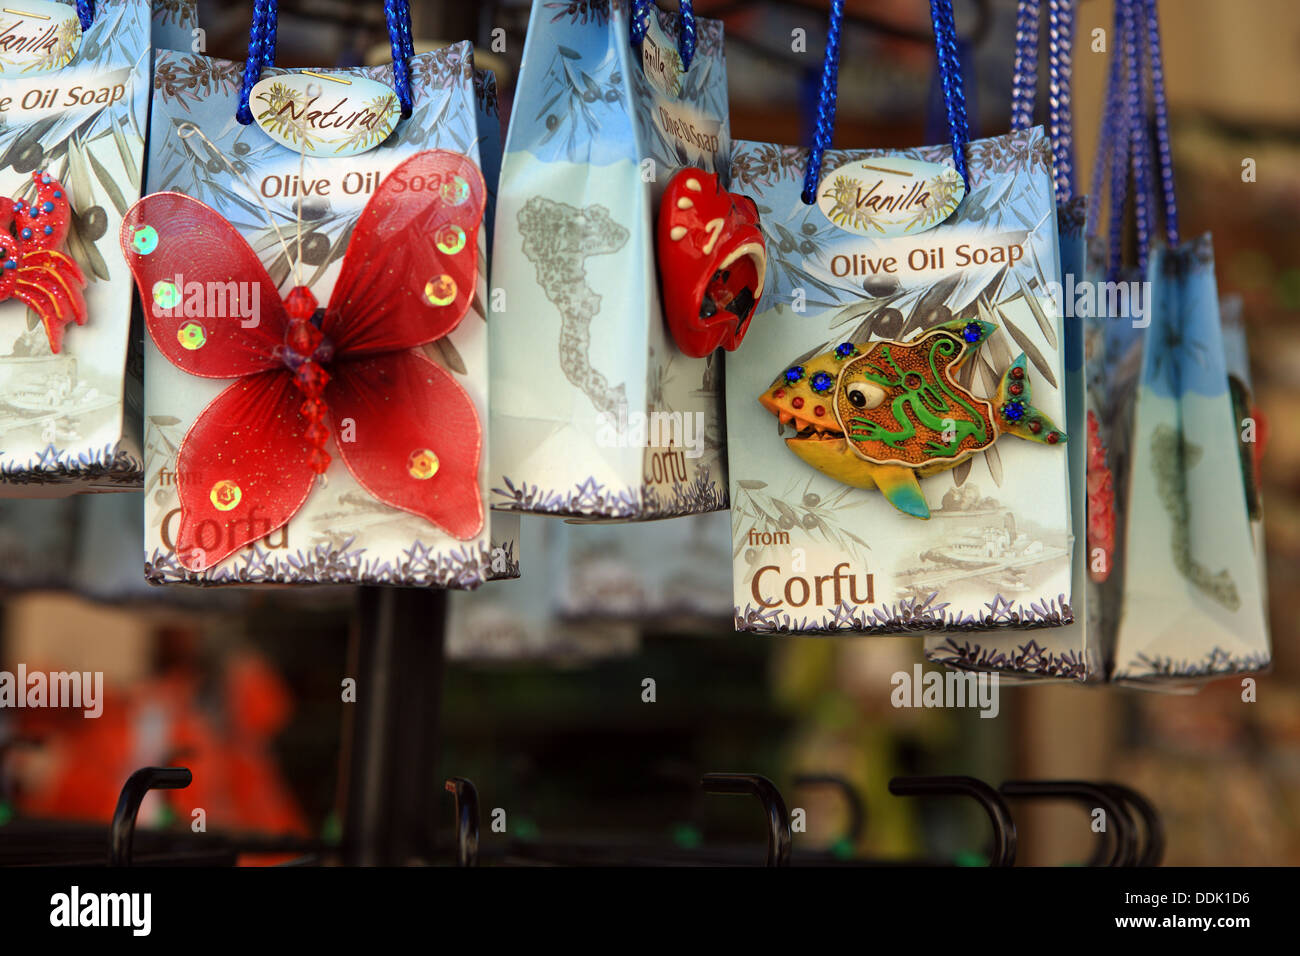 Pretty souvenir or gift bags of Olive Oil soap hanging from a shop display in Corfu Town Stock Photo